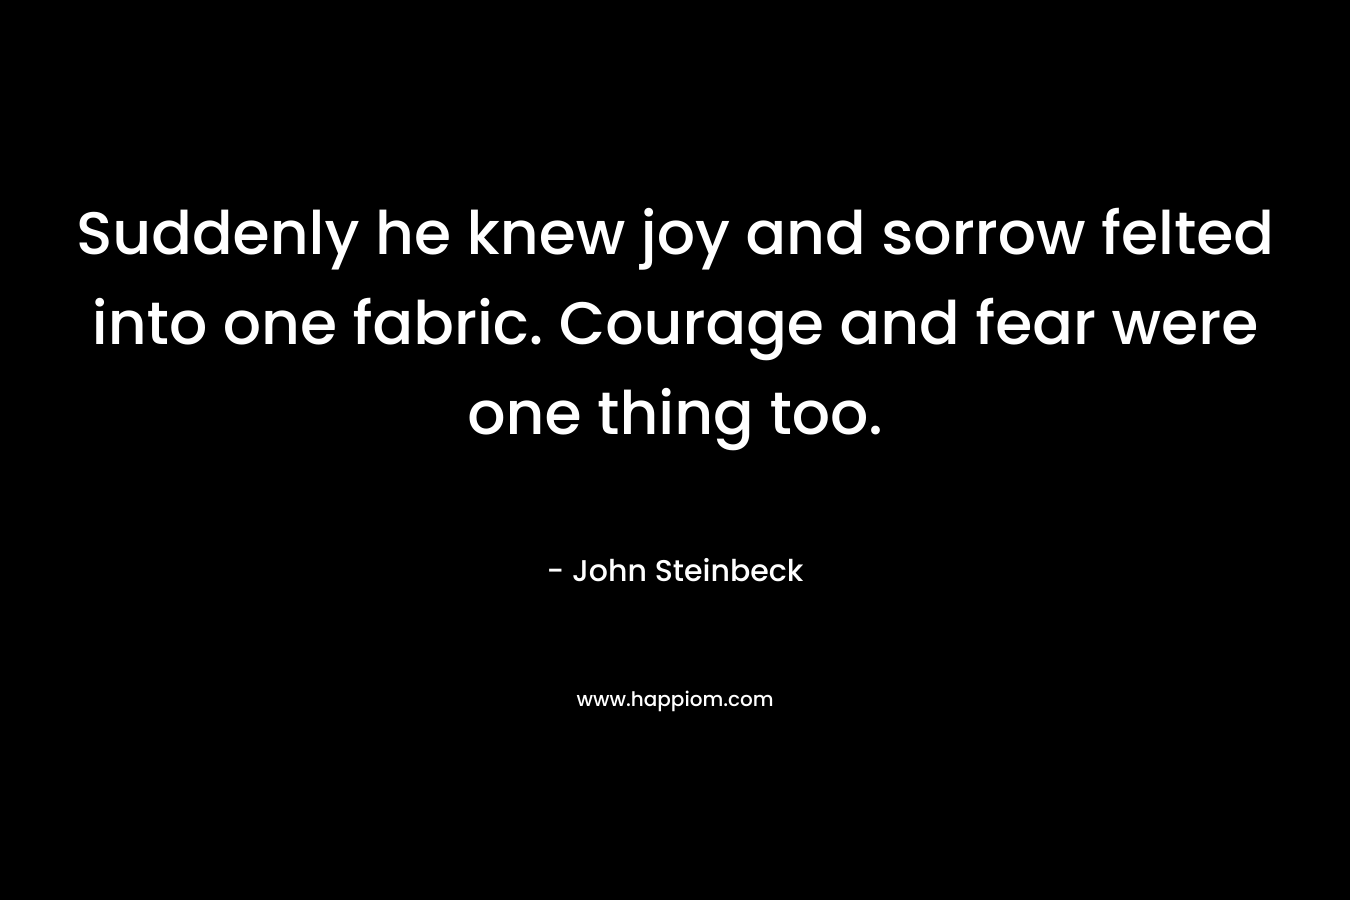 Suddenly he knew joy and sorrow felted into one fabric. Courage and fear were one thing too. – John Steinbeck